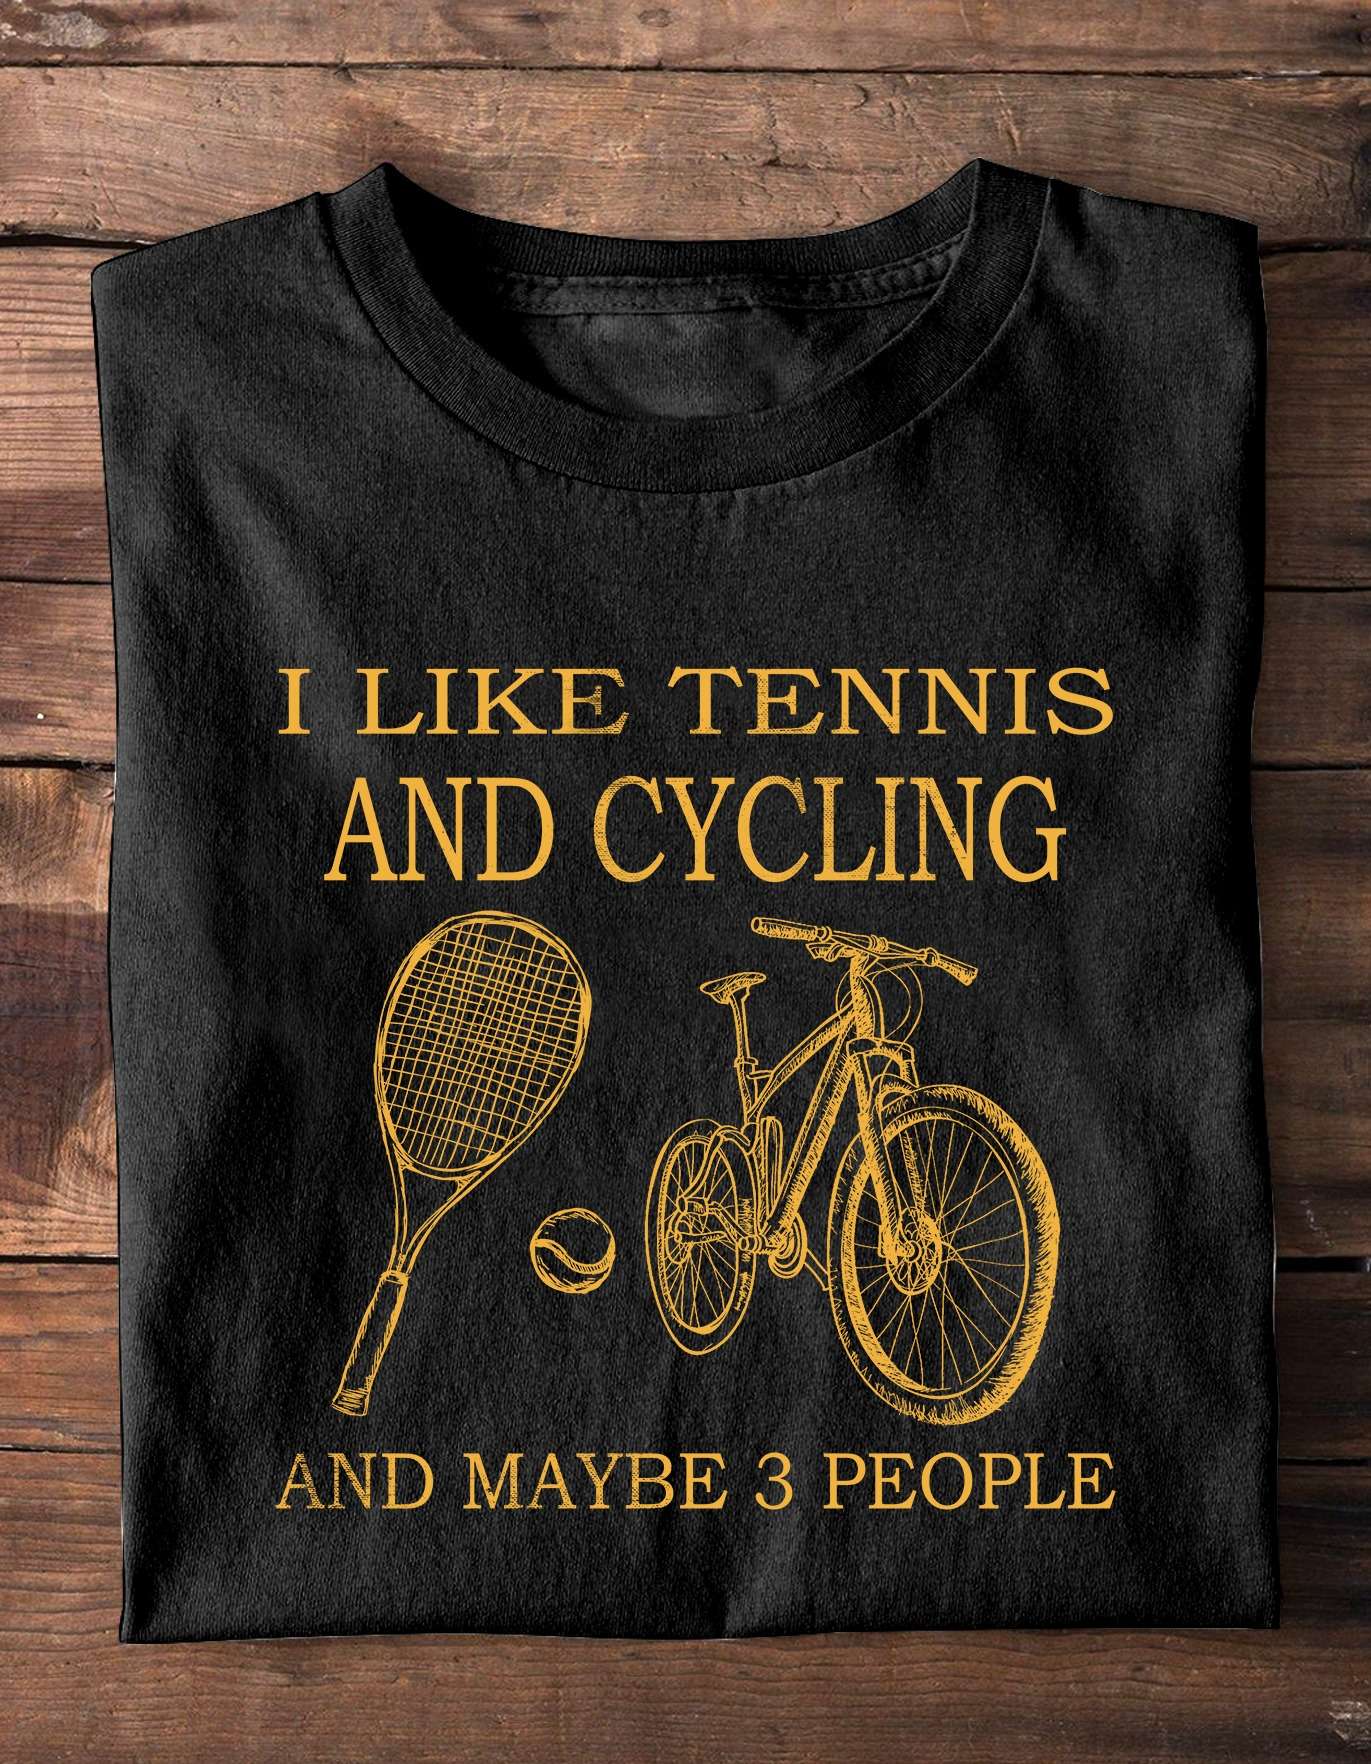 Tennis Cycling - I like tennis and cycling and maybe 3 people